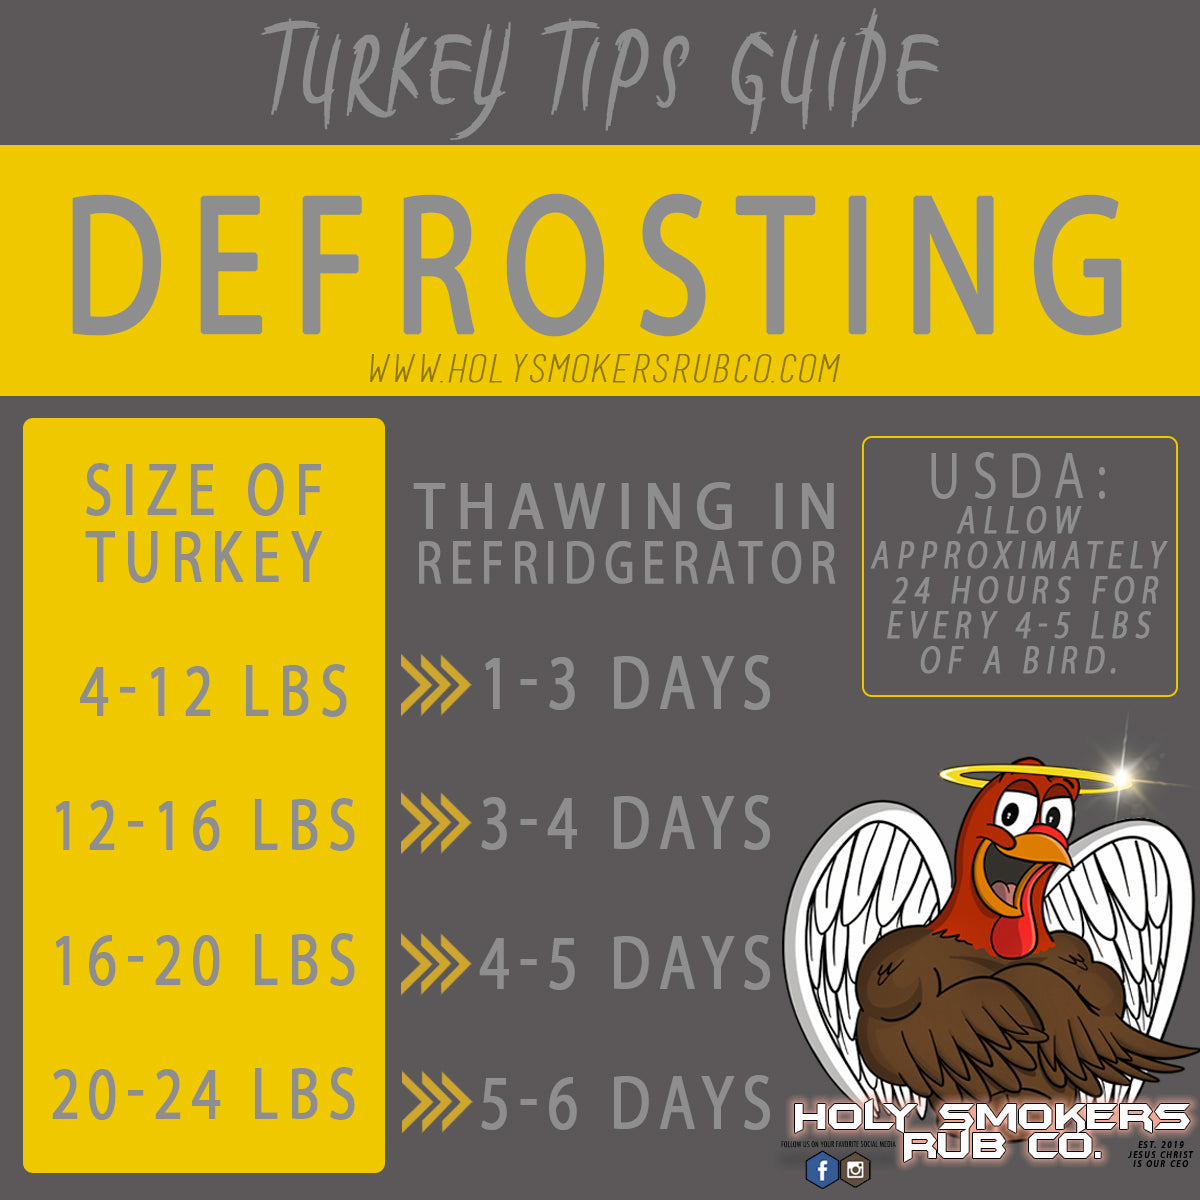 Turkey Defrost guide by holy smokers rub co